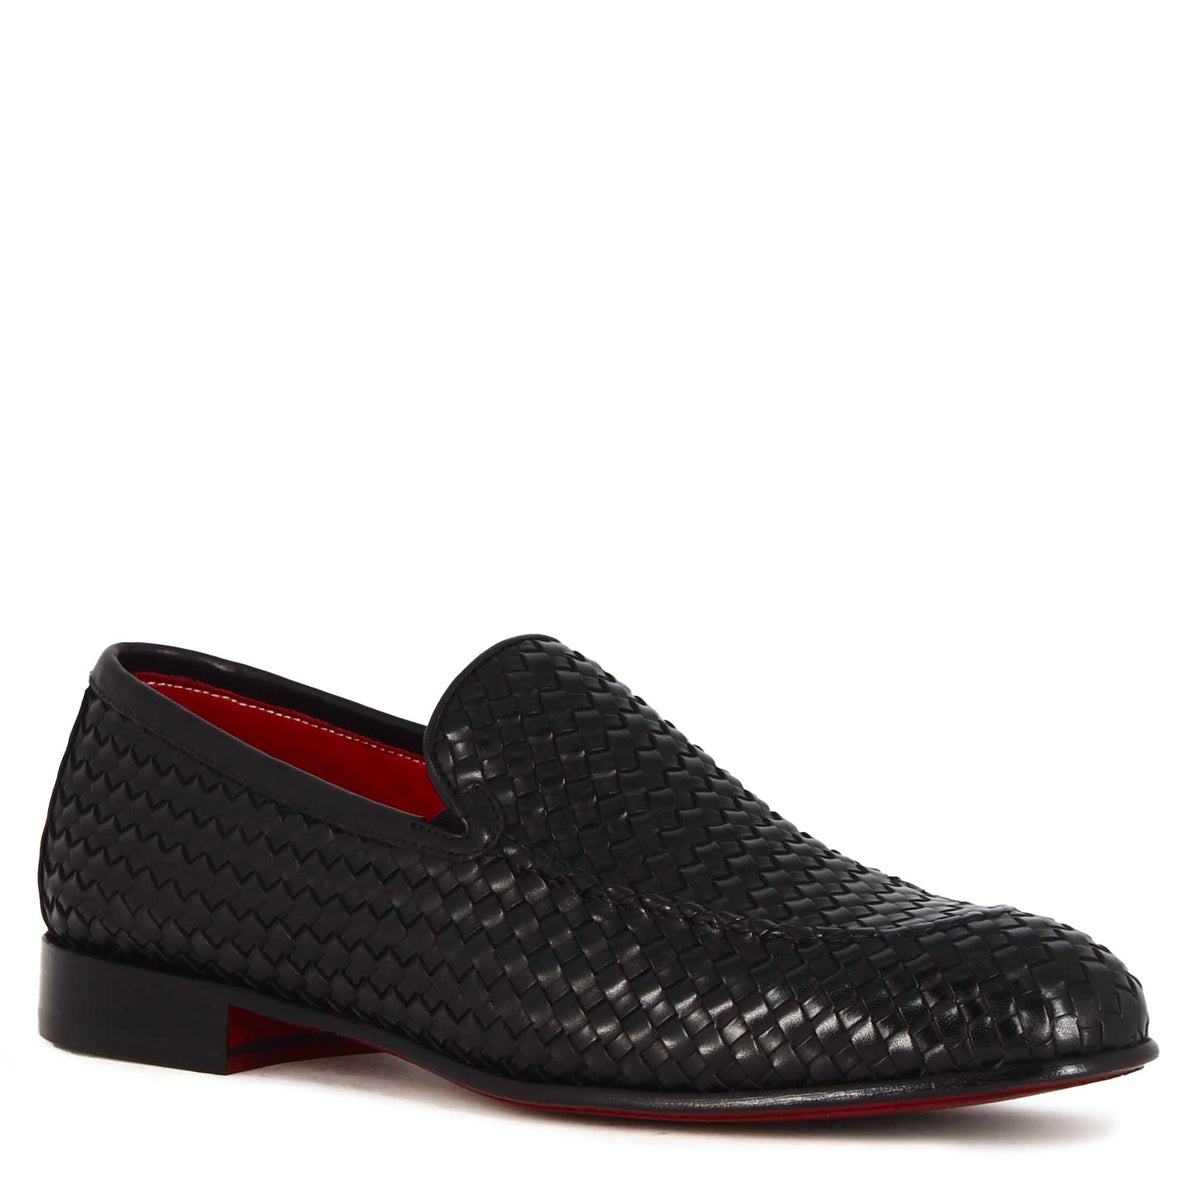 Classic men's moccasin in black woven leather